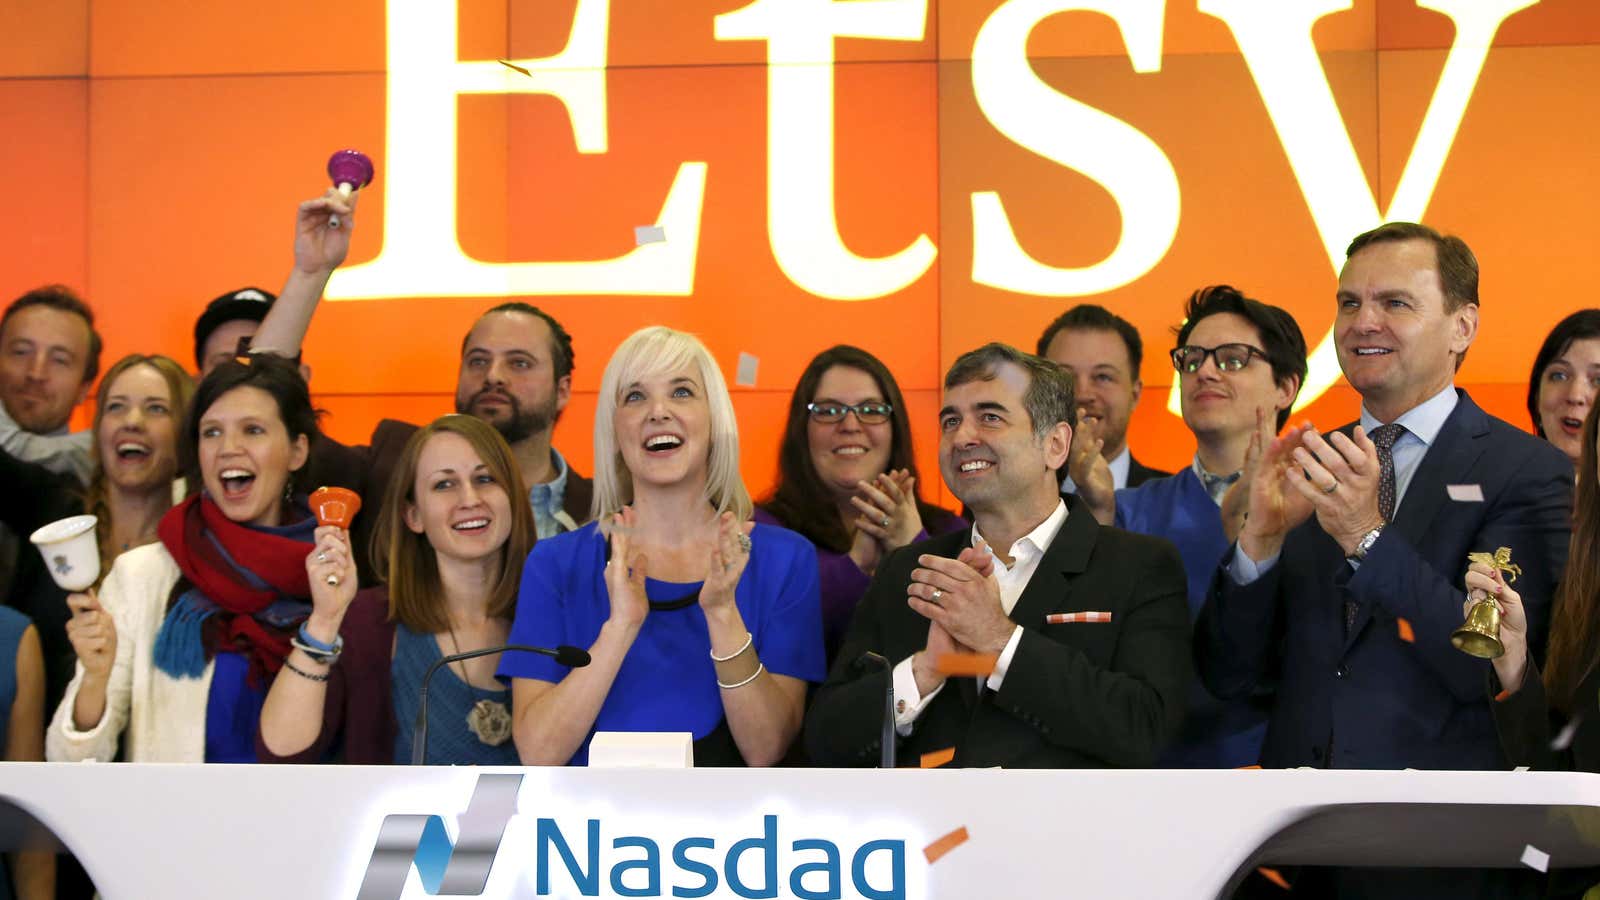 For Etsy and former CEO Chad Dickerson (center right), being public had a price.